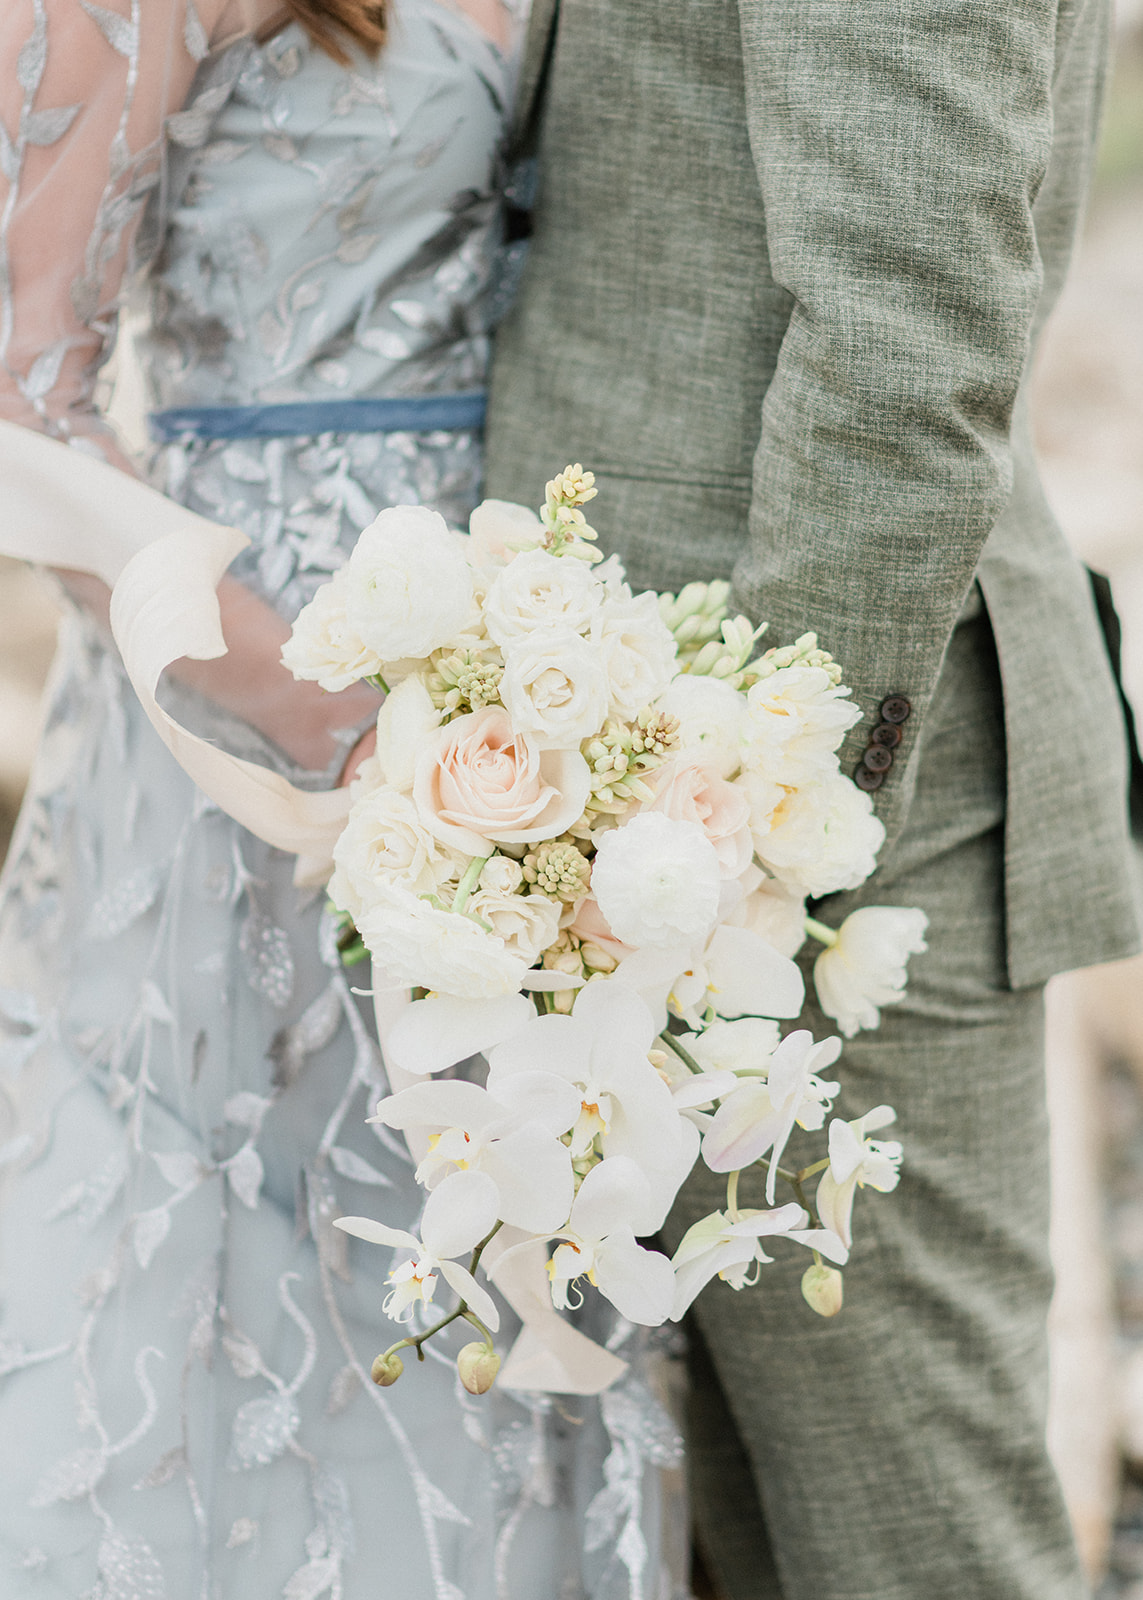 Bouquet details with blush roses and white orchids